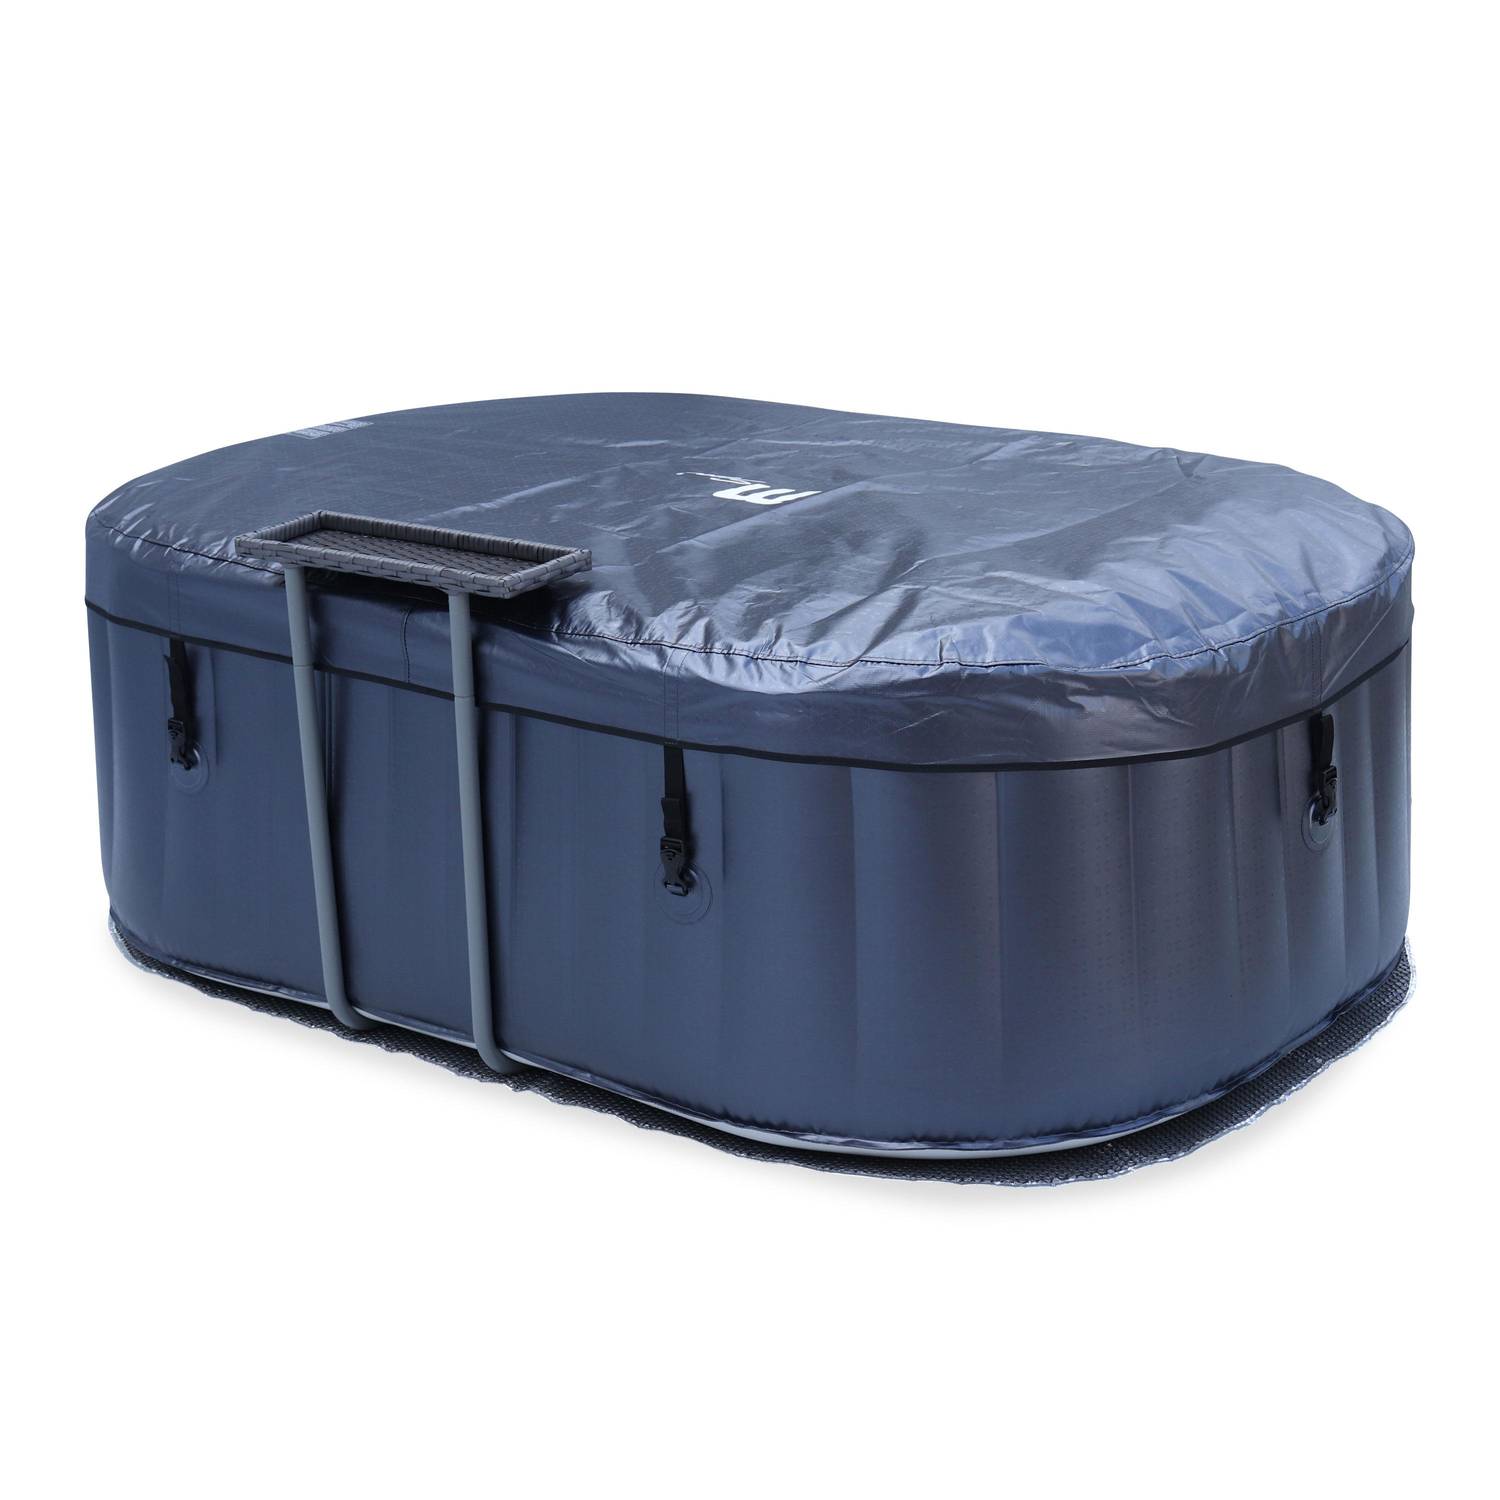  2-person premium inflatable hot tub MSpa - side table, heat-retaining mat, cover, inflatable cover support and remote control - Nest 2 - Blue Photo2